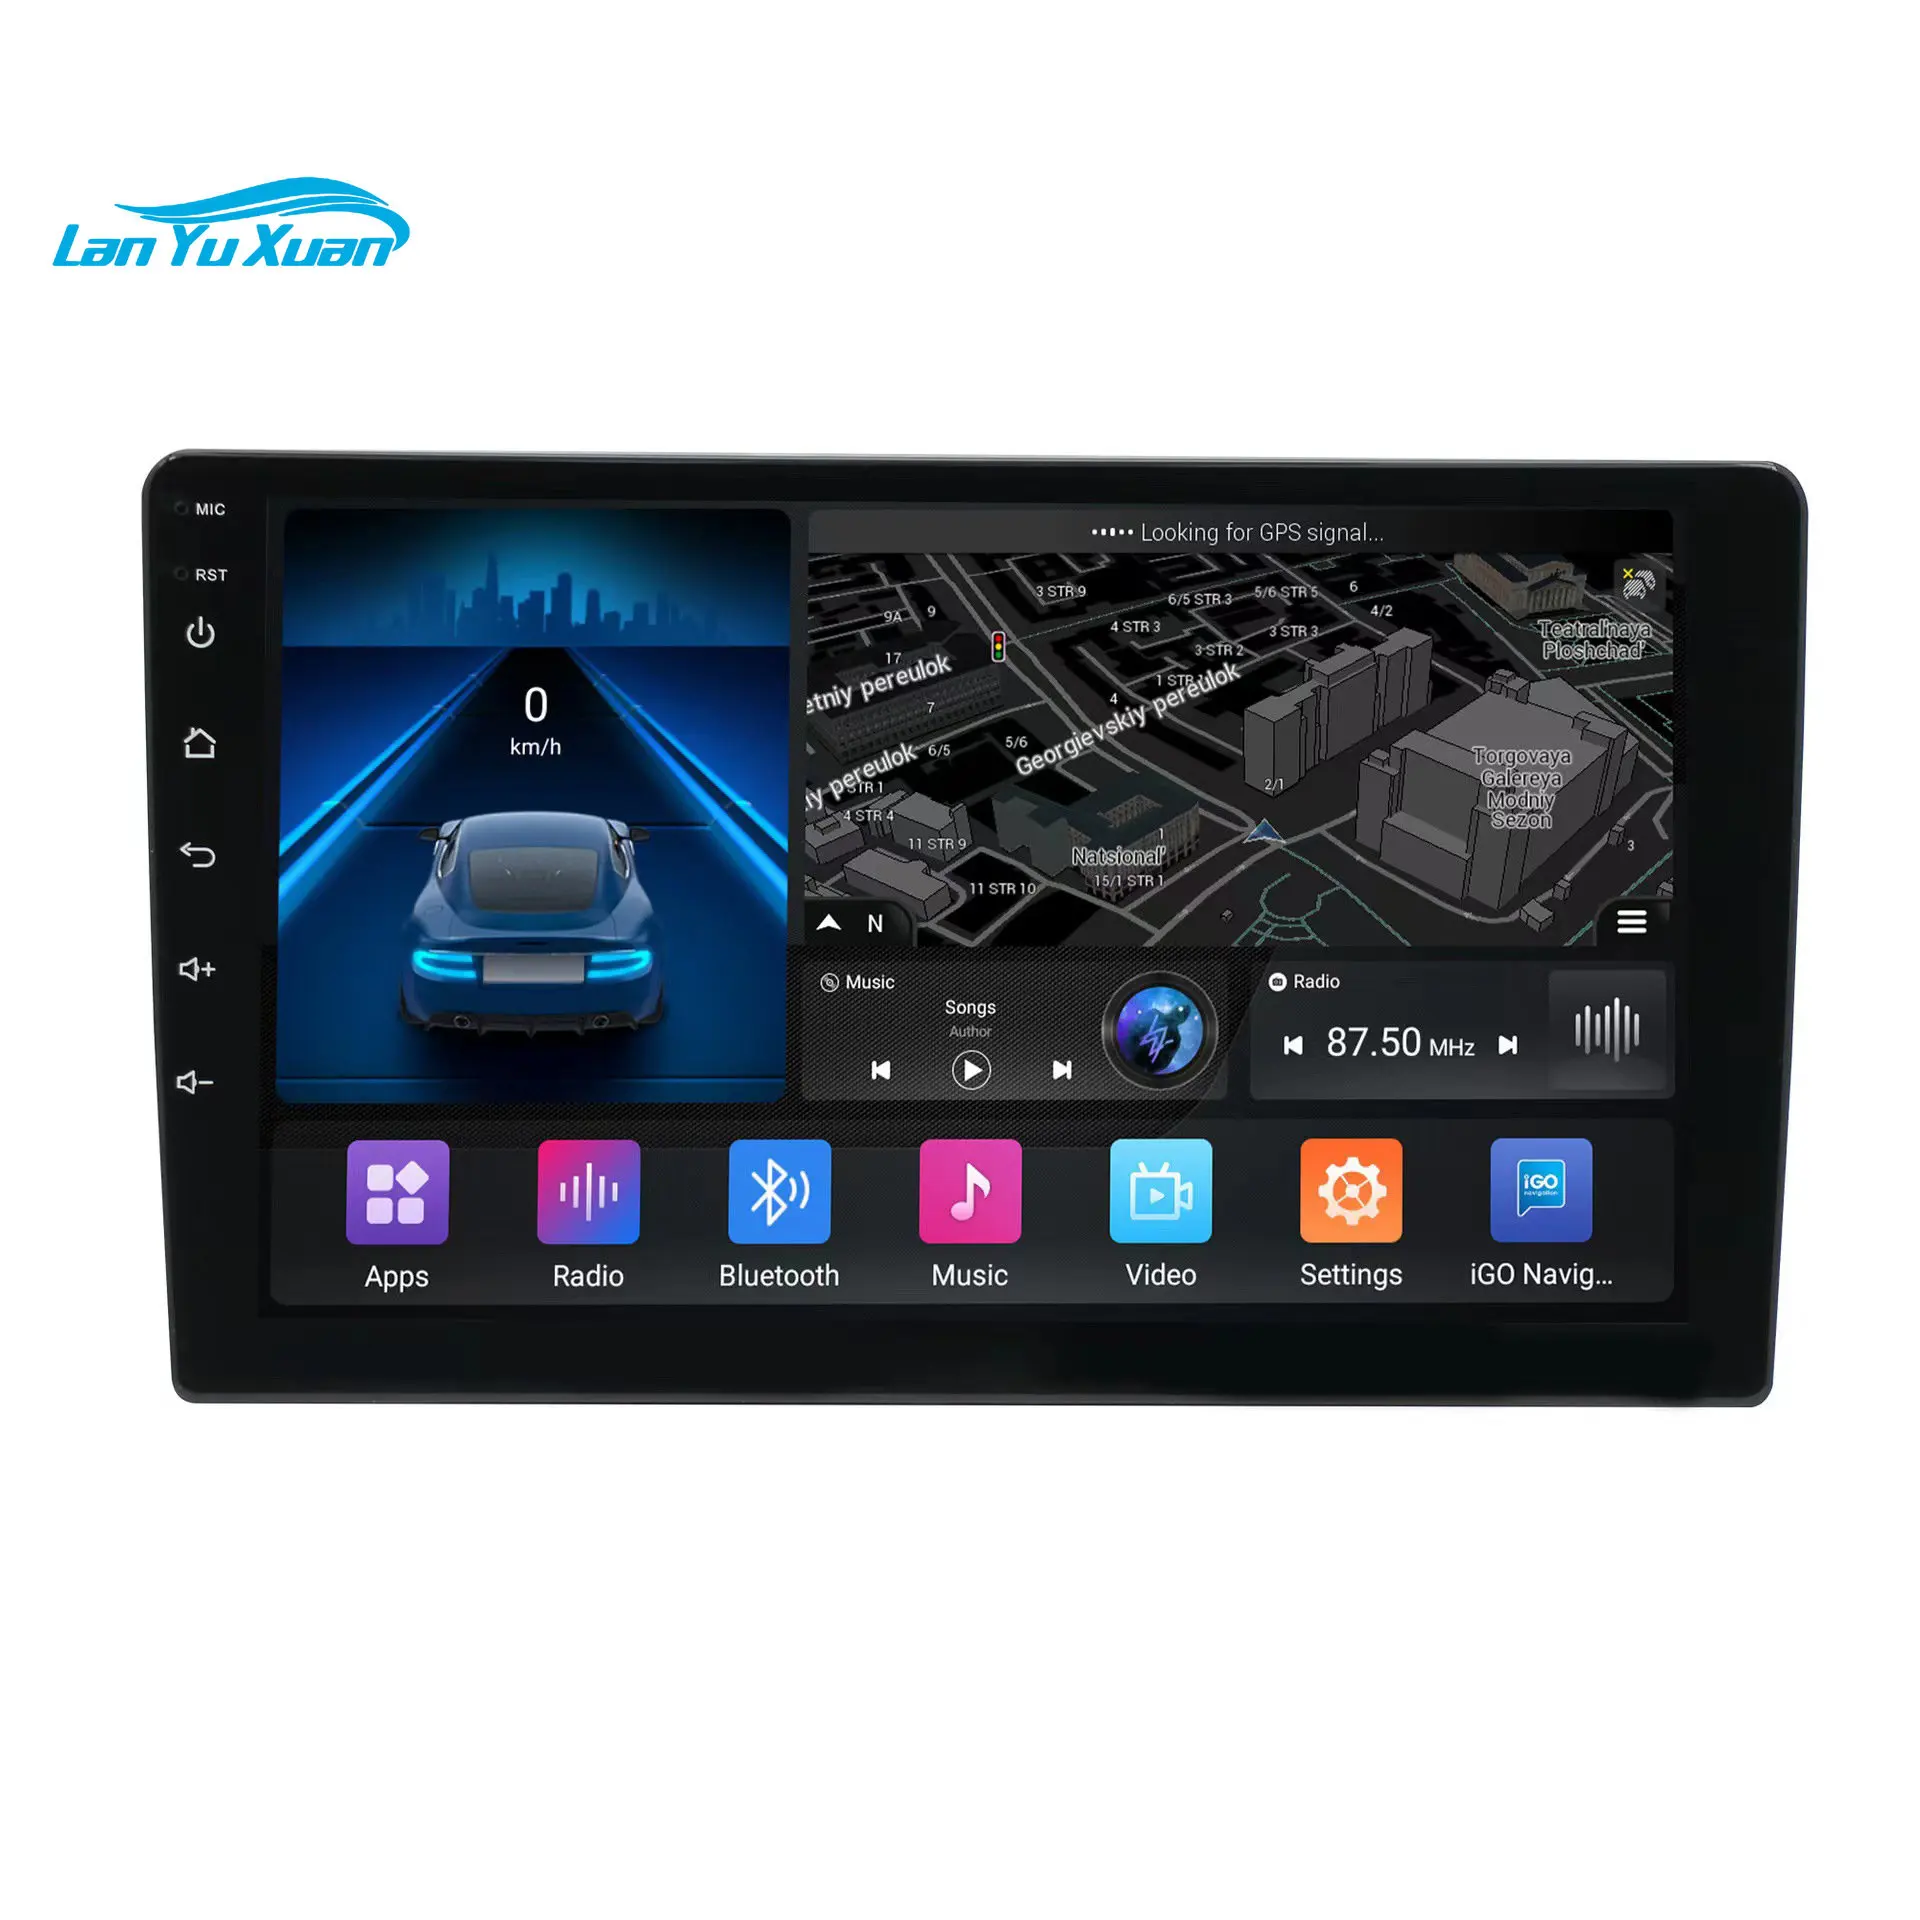 Touch Screen 9inch 10inch 12.3 inch 4G WIFI GPS Stereo Radio Navigation System o Auto mp5 player for car car gps navigation stereo for jeep wrangler 2011 2014 radio fascias panel frame fit 2 din 10 inch in dash headunit screen stereo